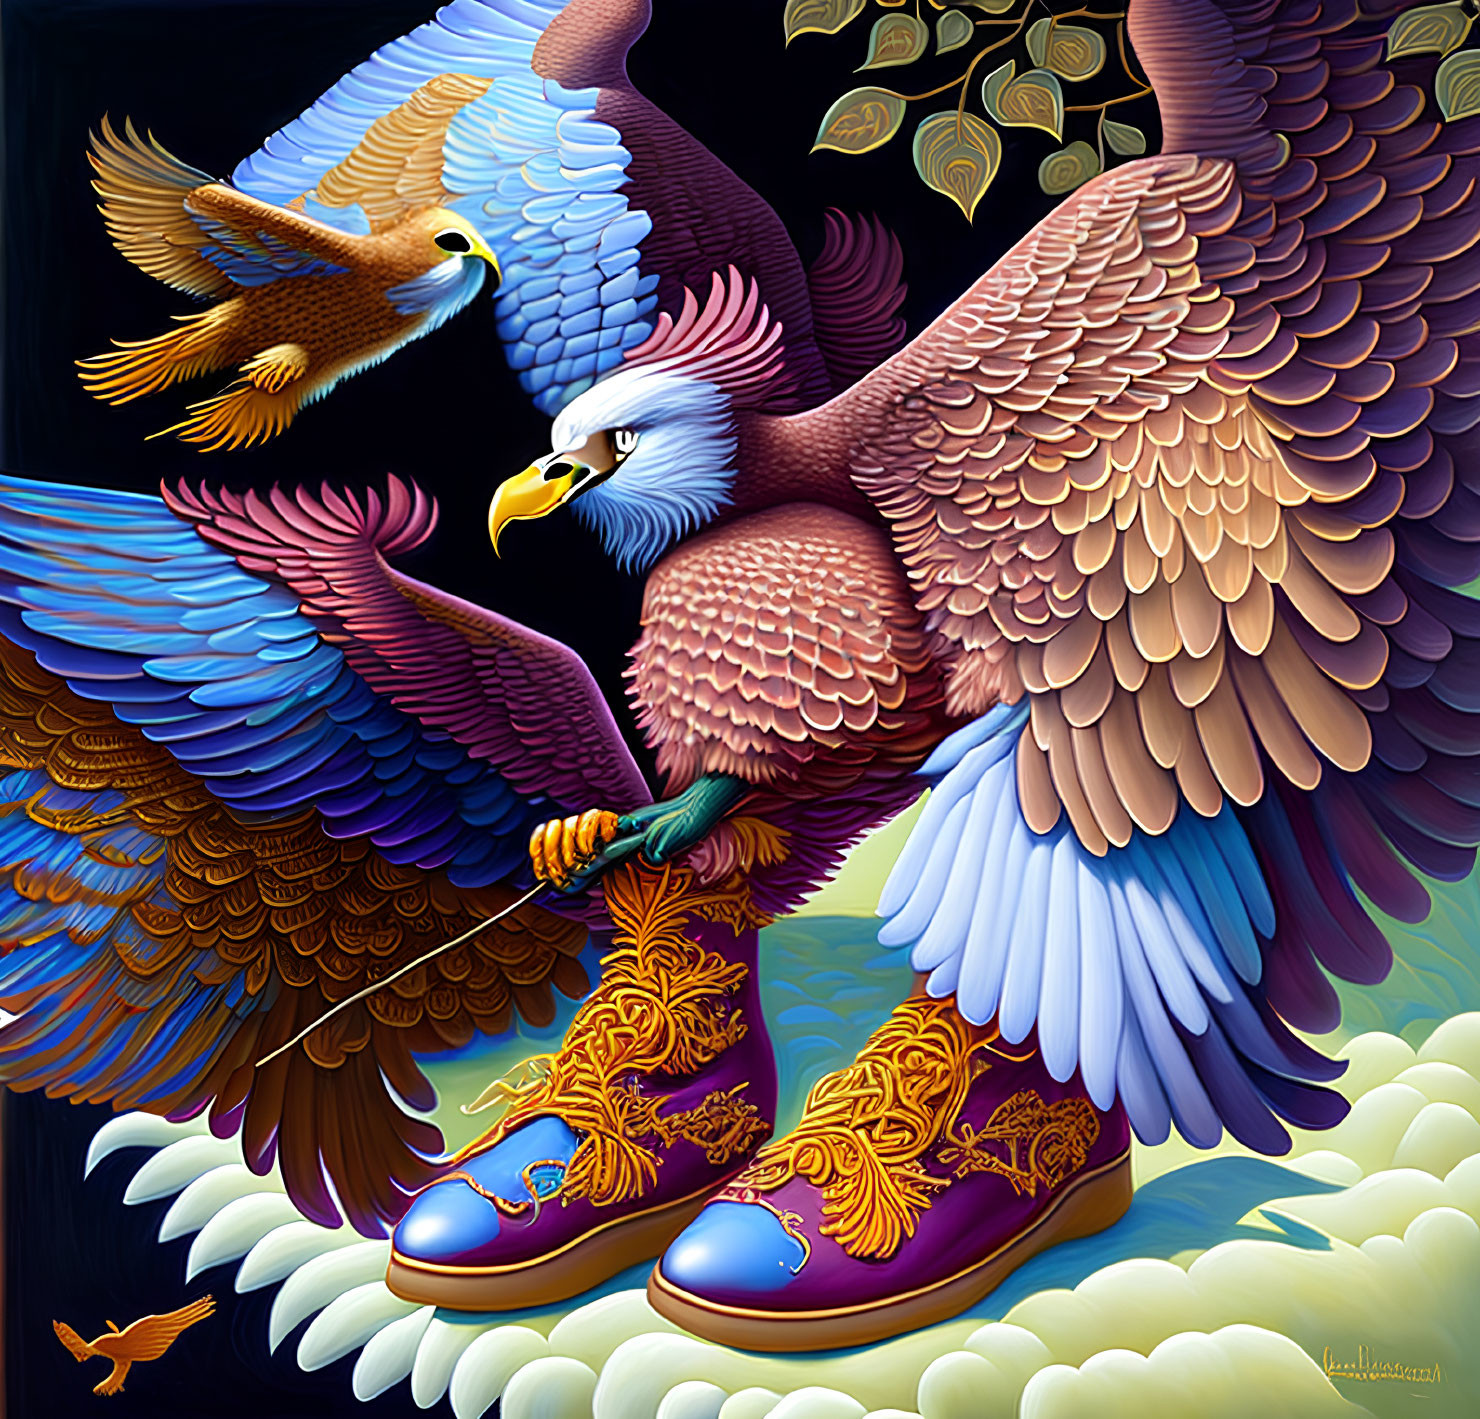 Colorful Eagle Illustration with Ornate Shoes in Flight